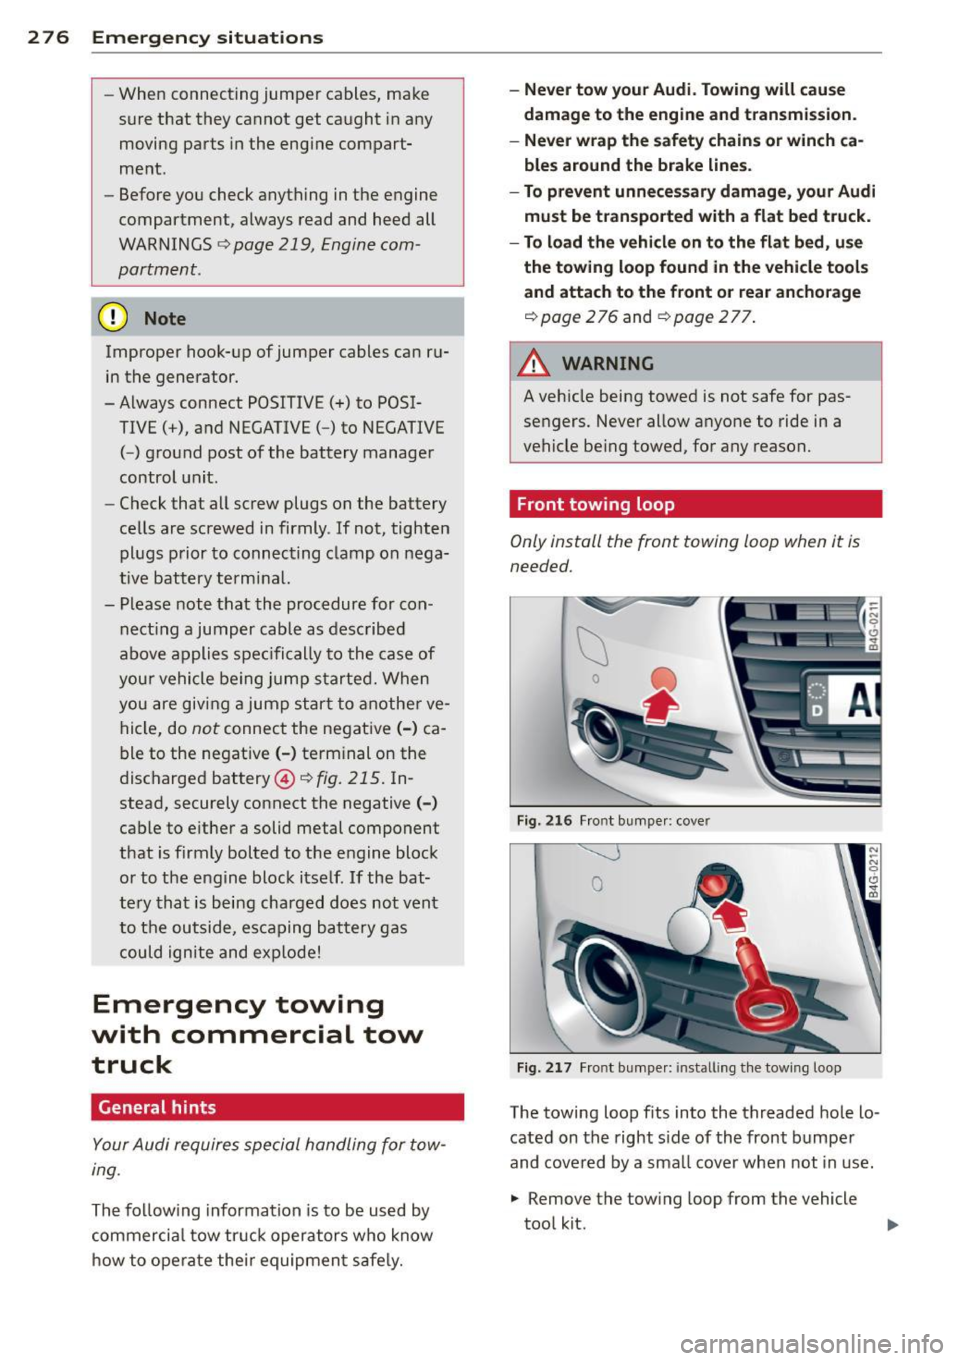 AUDI S6 2013  Owners Manual 2 76  Emergency  situations 
-When  connecting  jumper  cables,  make 
sure  that  they  cannot  get  caught  in any 
moving  parts  in the  engine  compart­
ment. 
- Before  you  check  anything  in